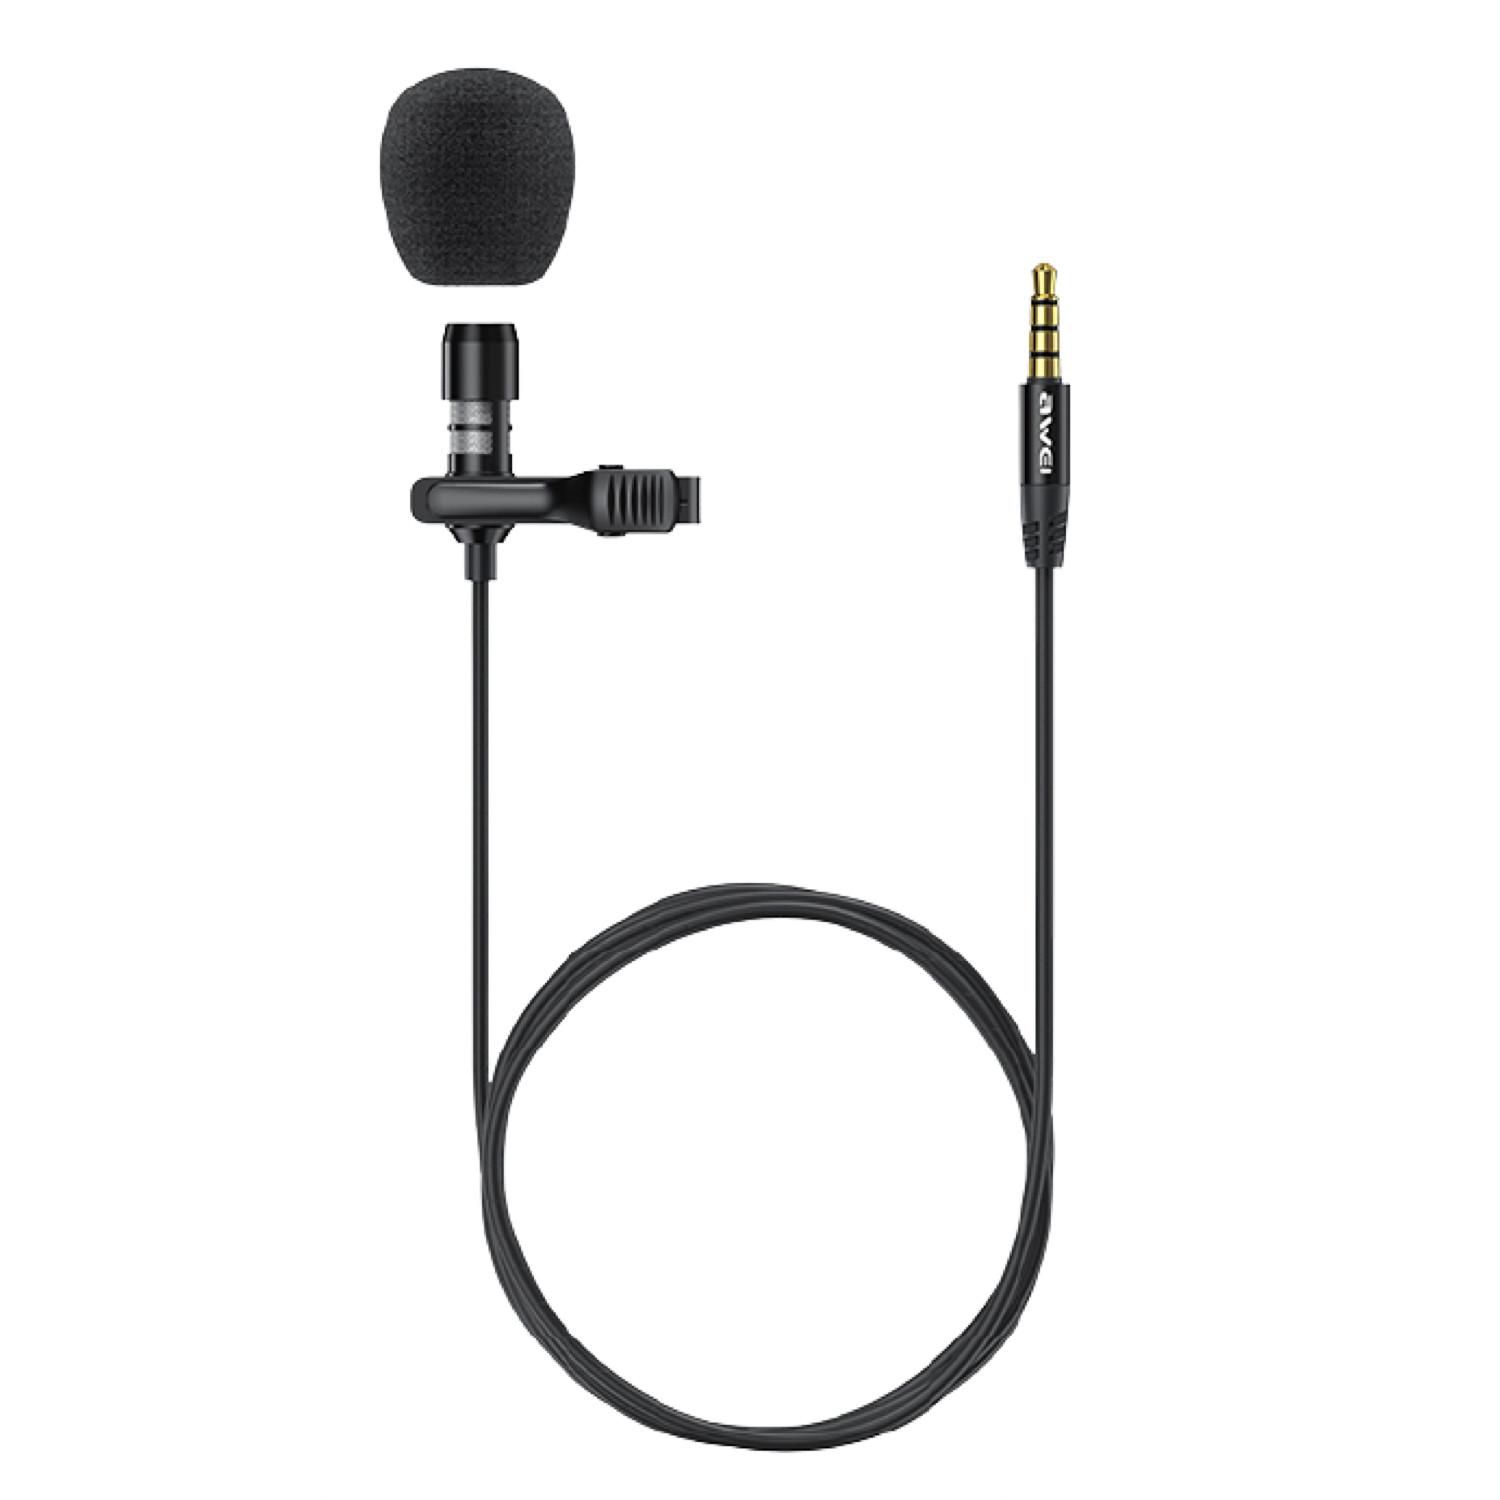 Awei MK1 3M Lavalier Wired Clip Microphone for  Live Streaming / Live Webcast